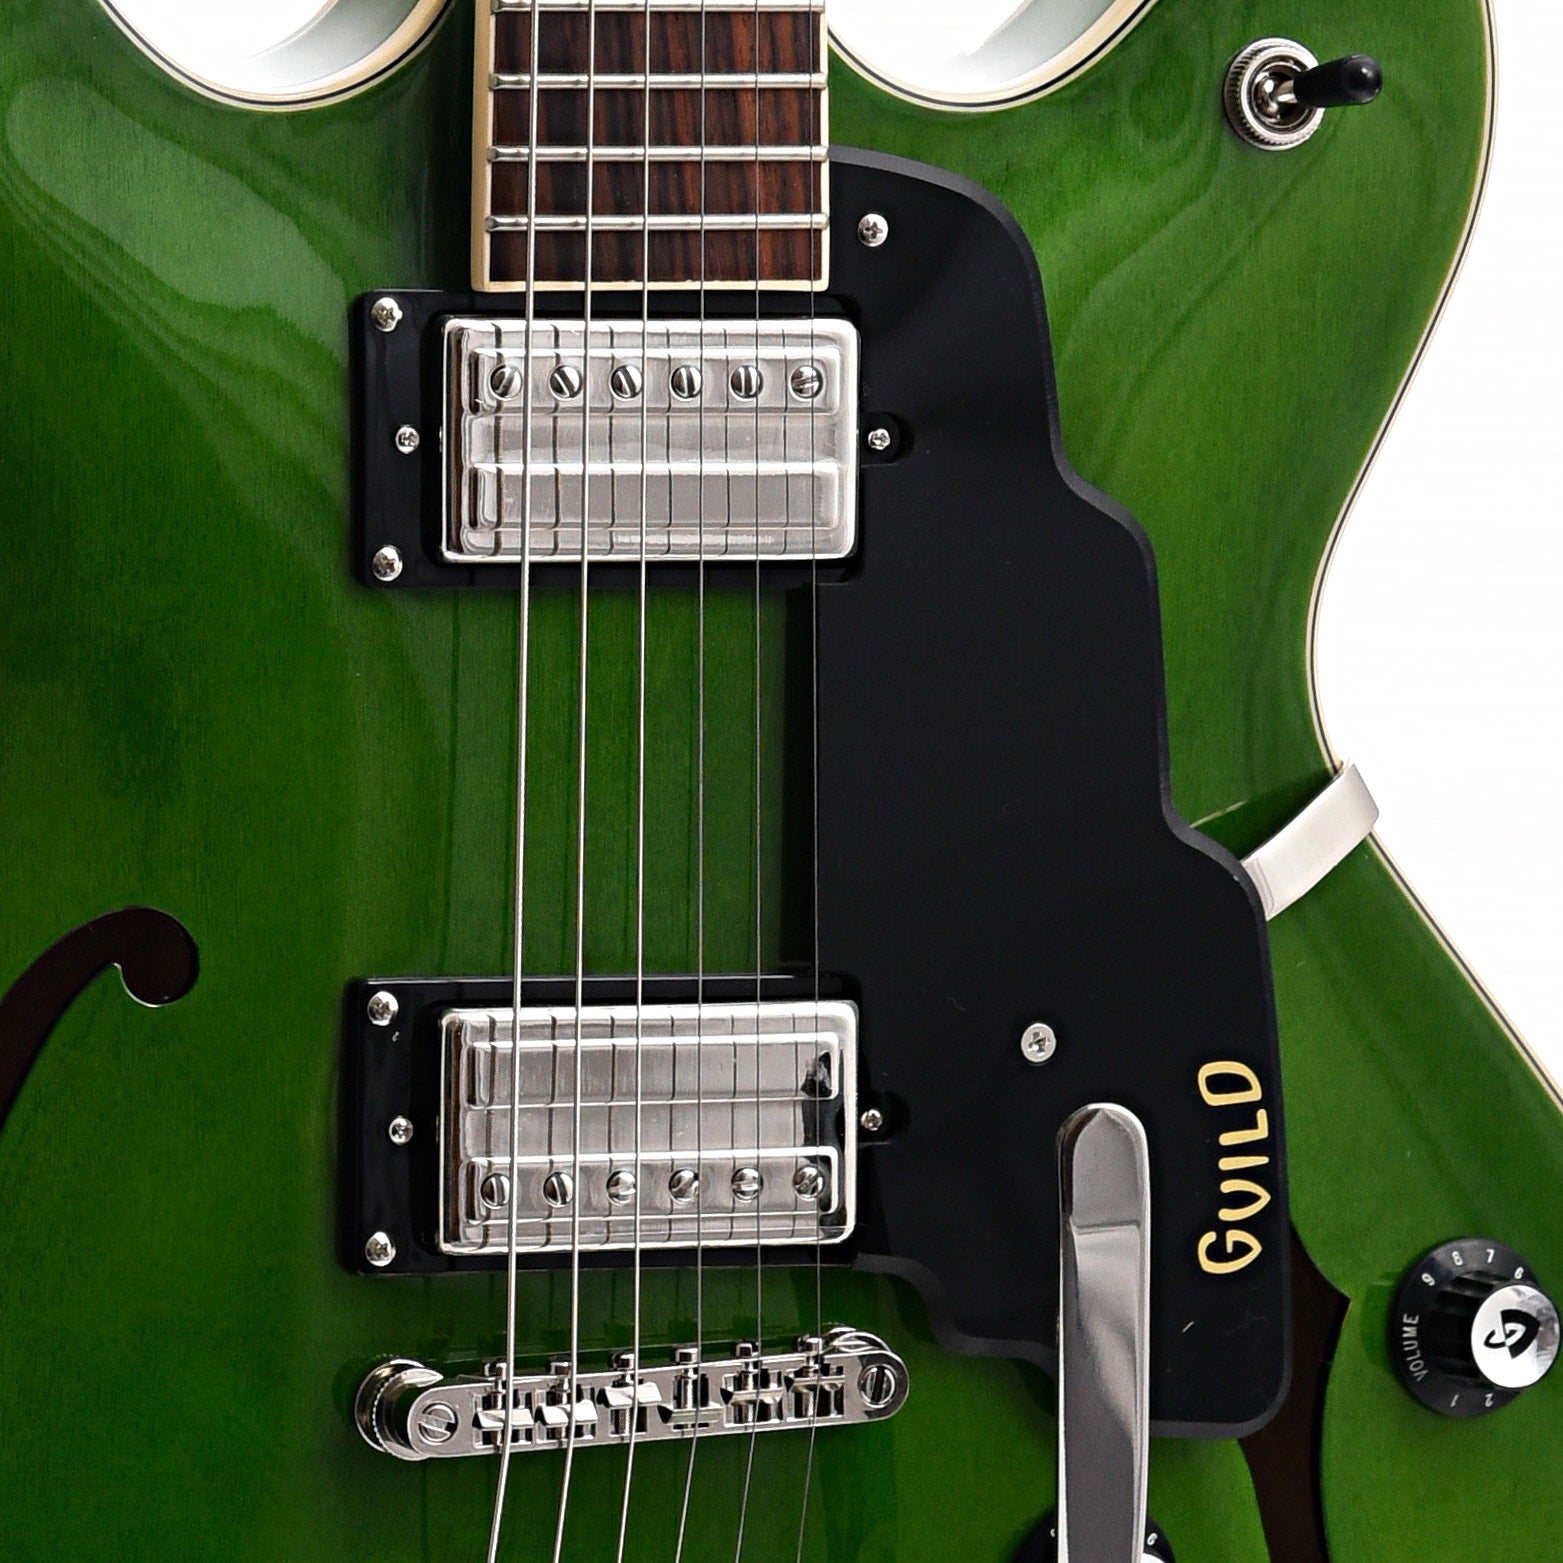 Image 4 of Guild Starfire I Double Cutaway Semi-Hollow Body Guitar with Vibrato, Emerald Green - SKU# GSF1DCV-GRN : Product Type Hollow Body Electric Guitars : Elderly Instruments